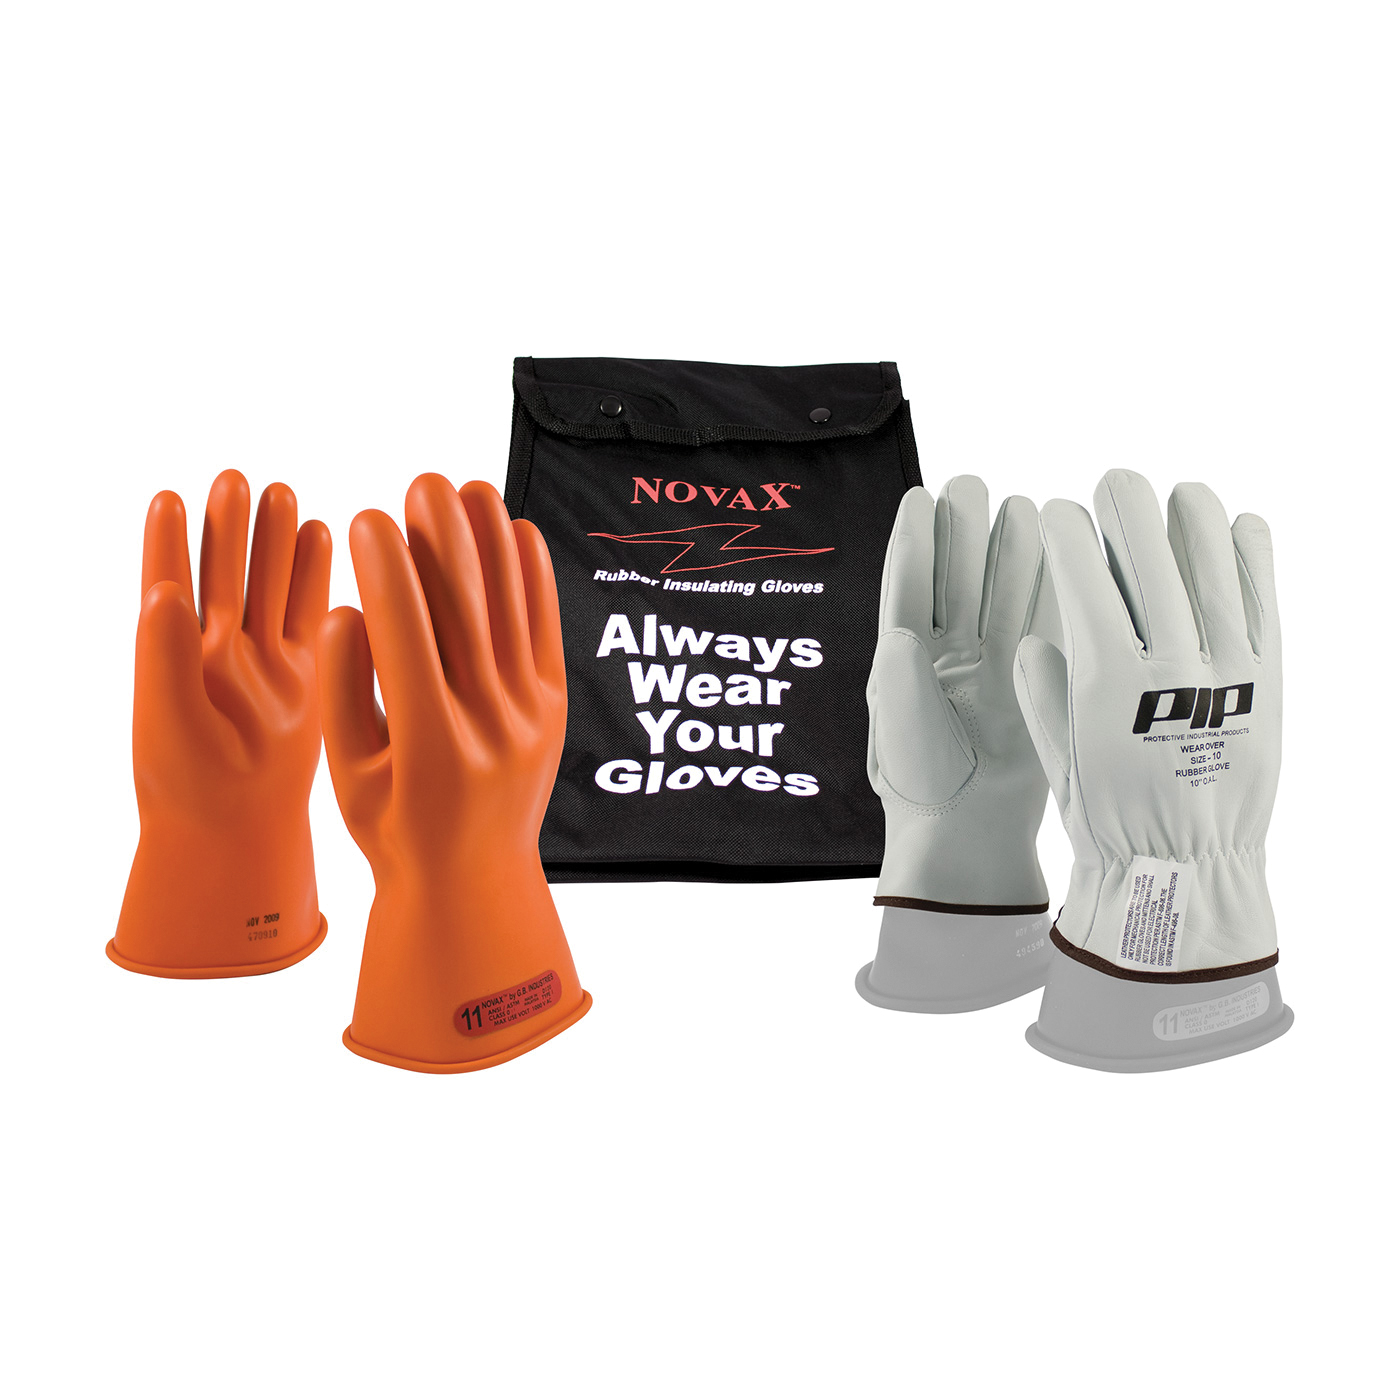 Novax® 147-SK-0/9-KIT Insulating Unisex Electrical Safety Gloves Kit, SZ 9, Goatskin Leather/Natural Rubber, Natural/Orange, 11 in L, ASTM Class: Class 0, 1000 VAC, 1500 VDC Max Use Voltage